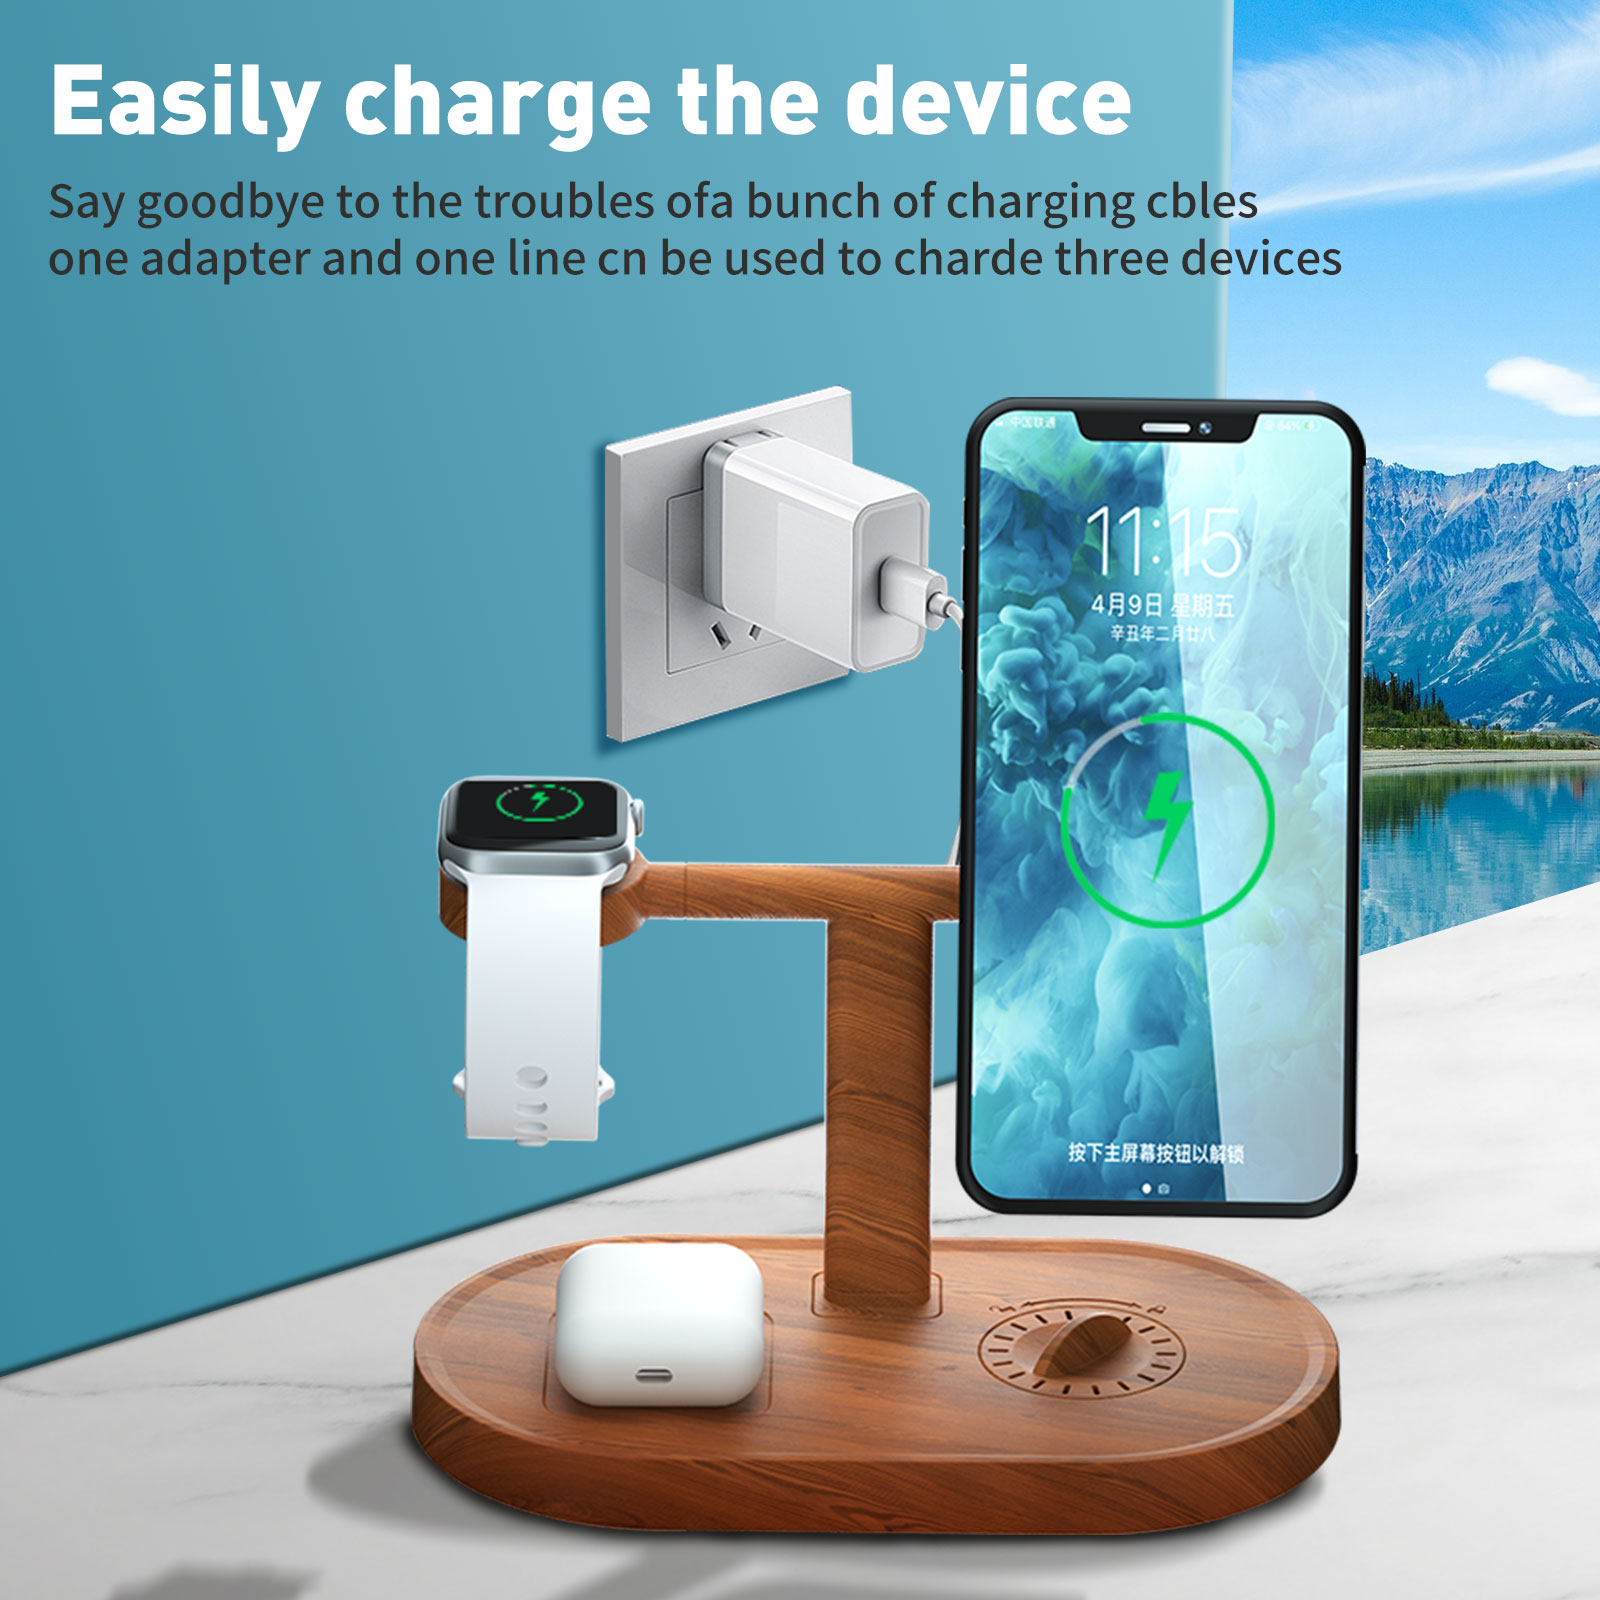 SMOIVE 3 in 1 Wireless Qi Fast Charger Dock Stand for iPhone 12 And Above &AirPods 2 and above & Apple Watch (Wood Color) - image 5 of 8